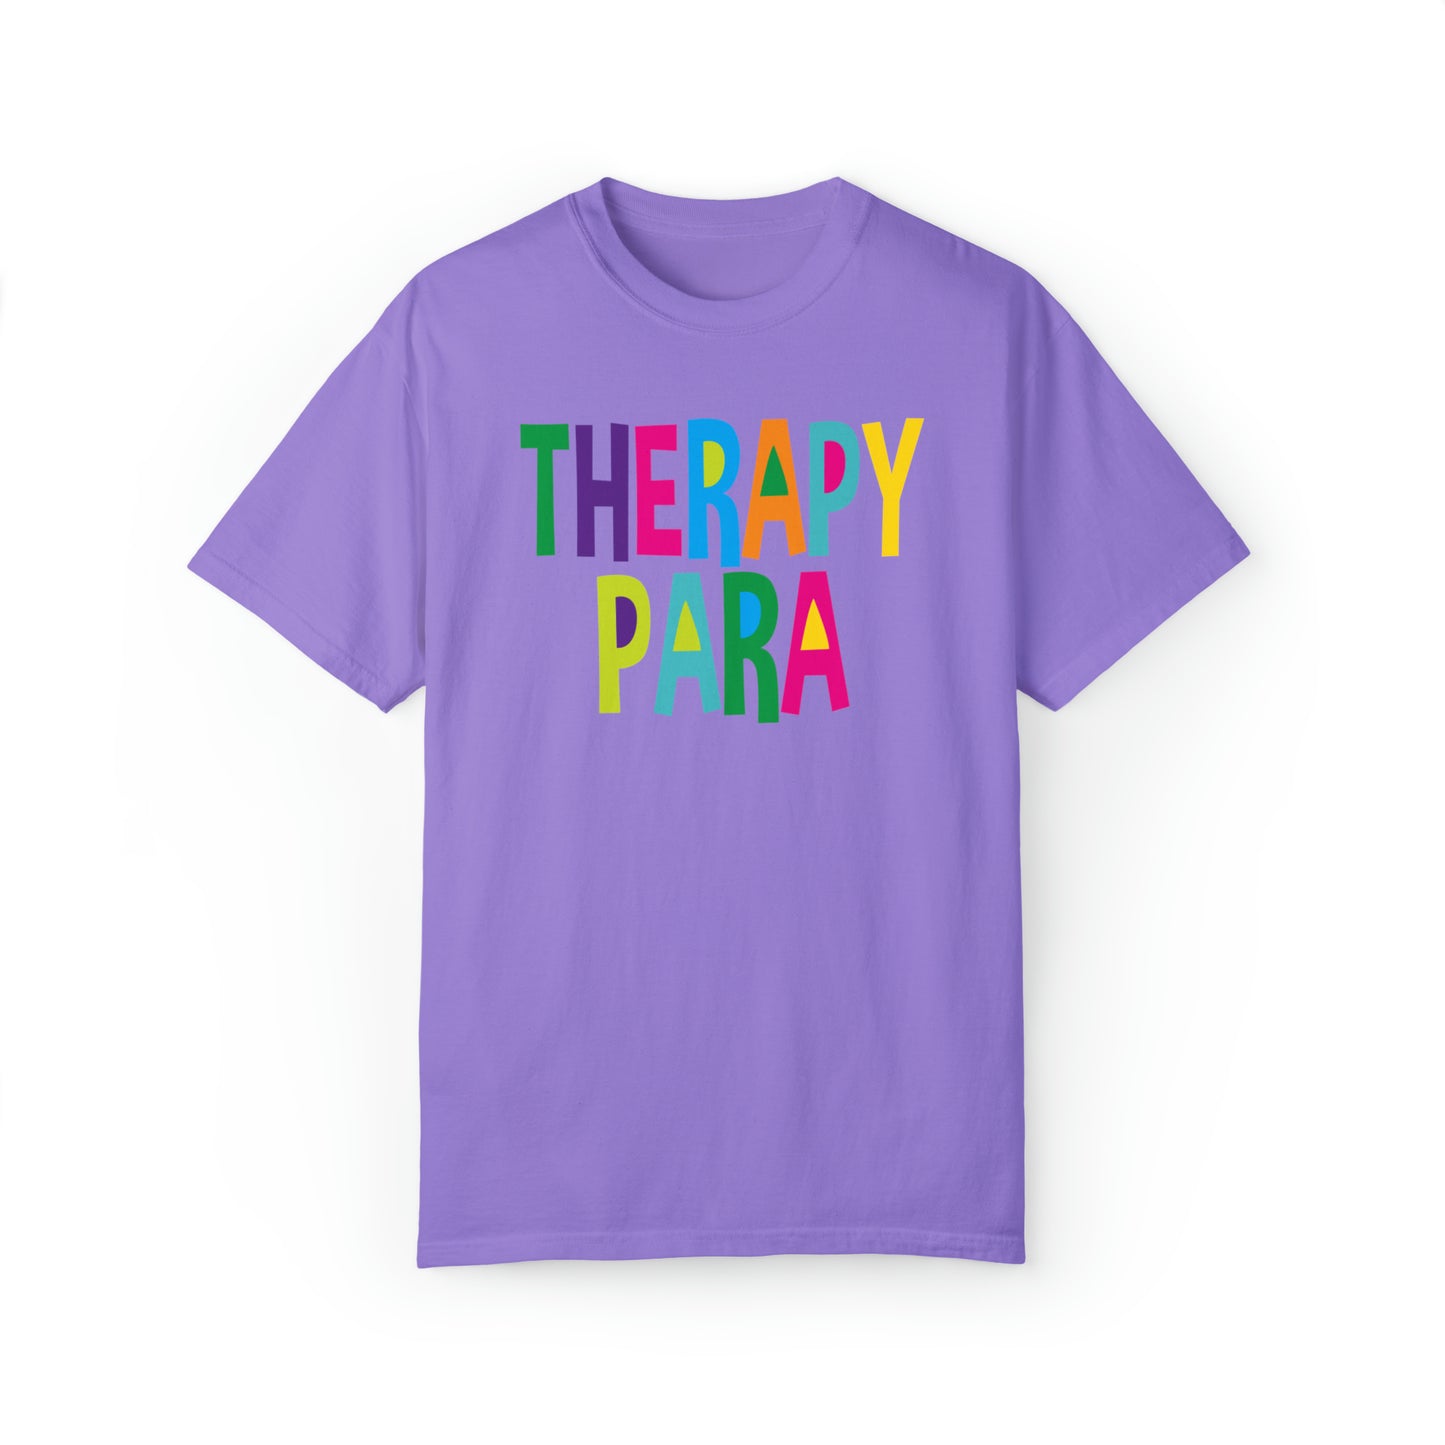 Therapy Para - Comfort Colors 1717 Unisex Garment-Dyed T-shirt